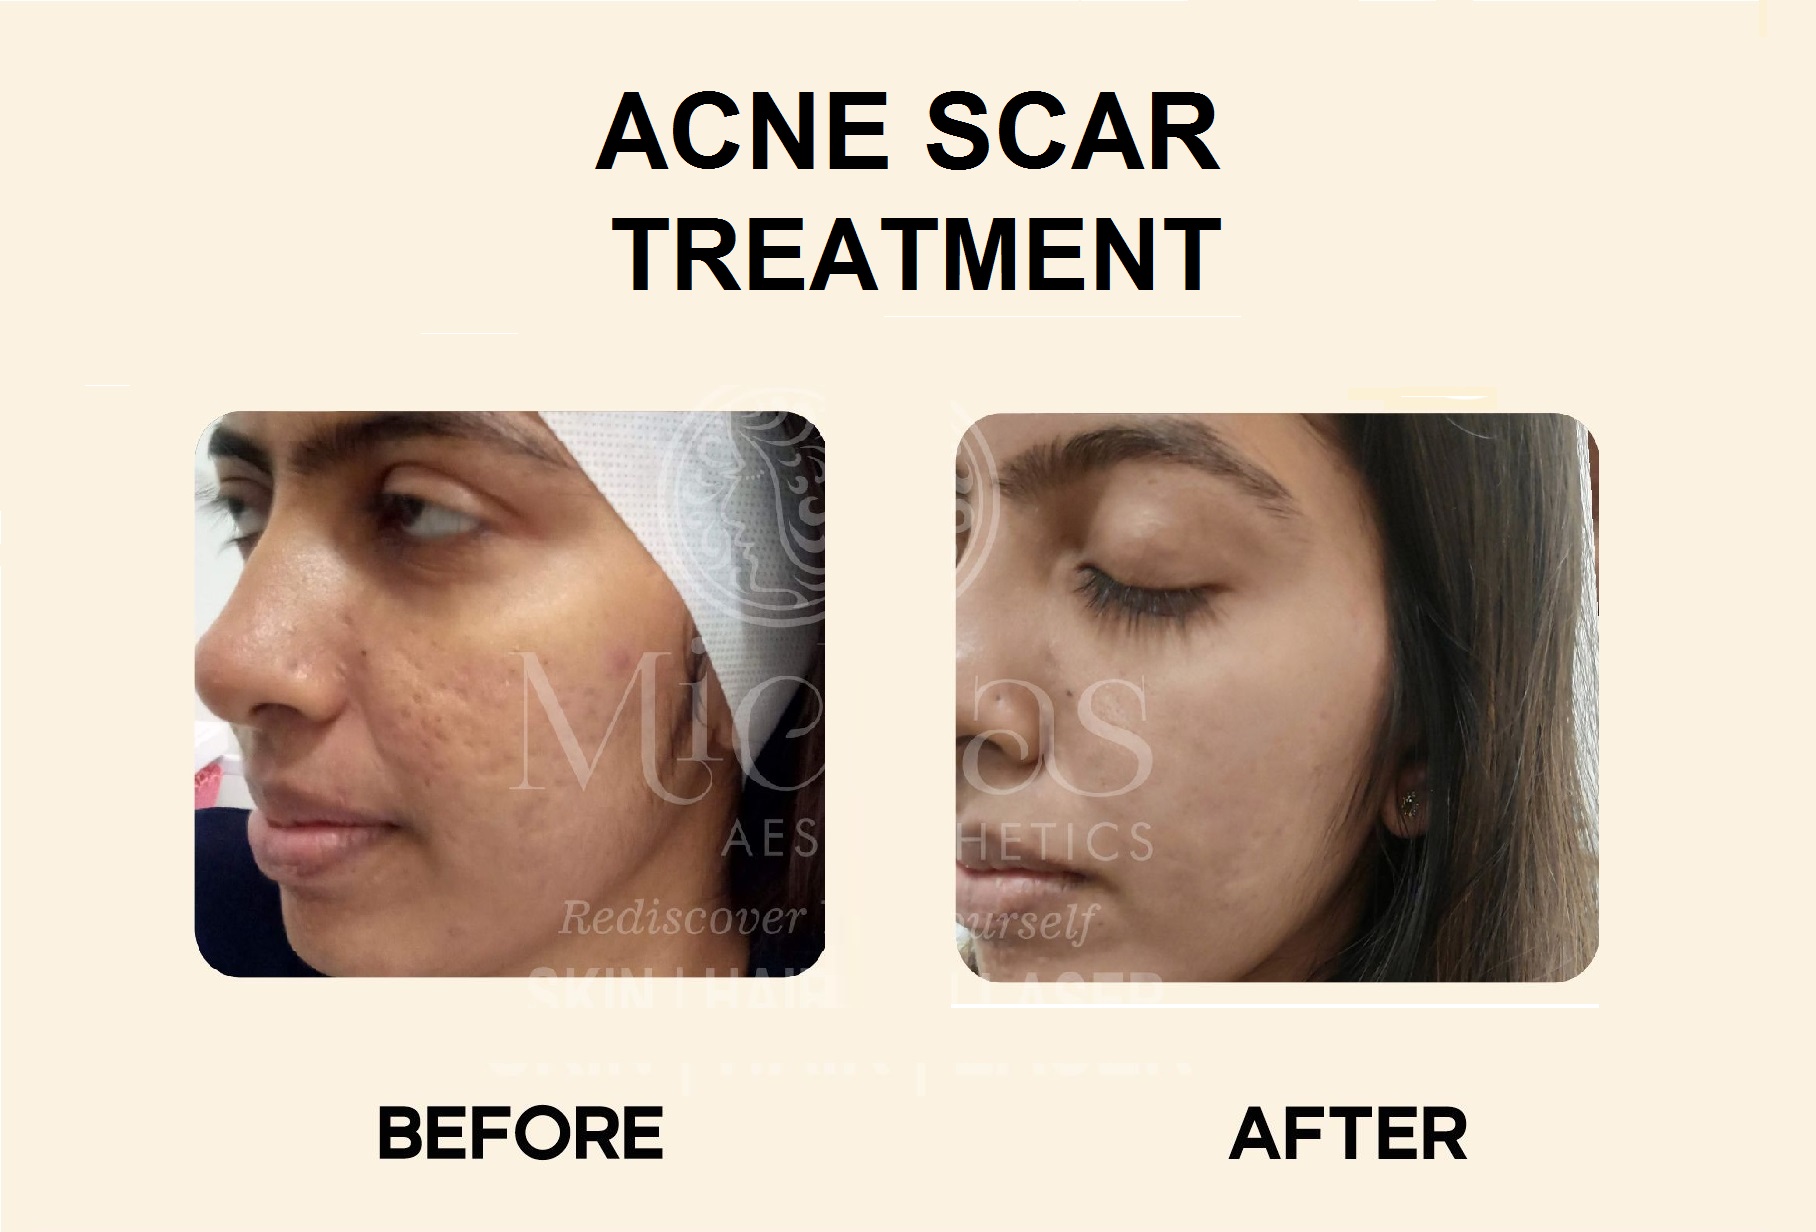 Acne Scar treatment, before and after images